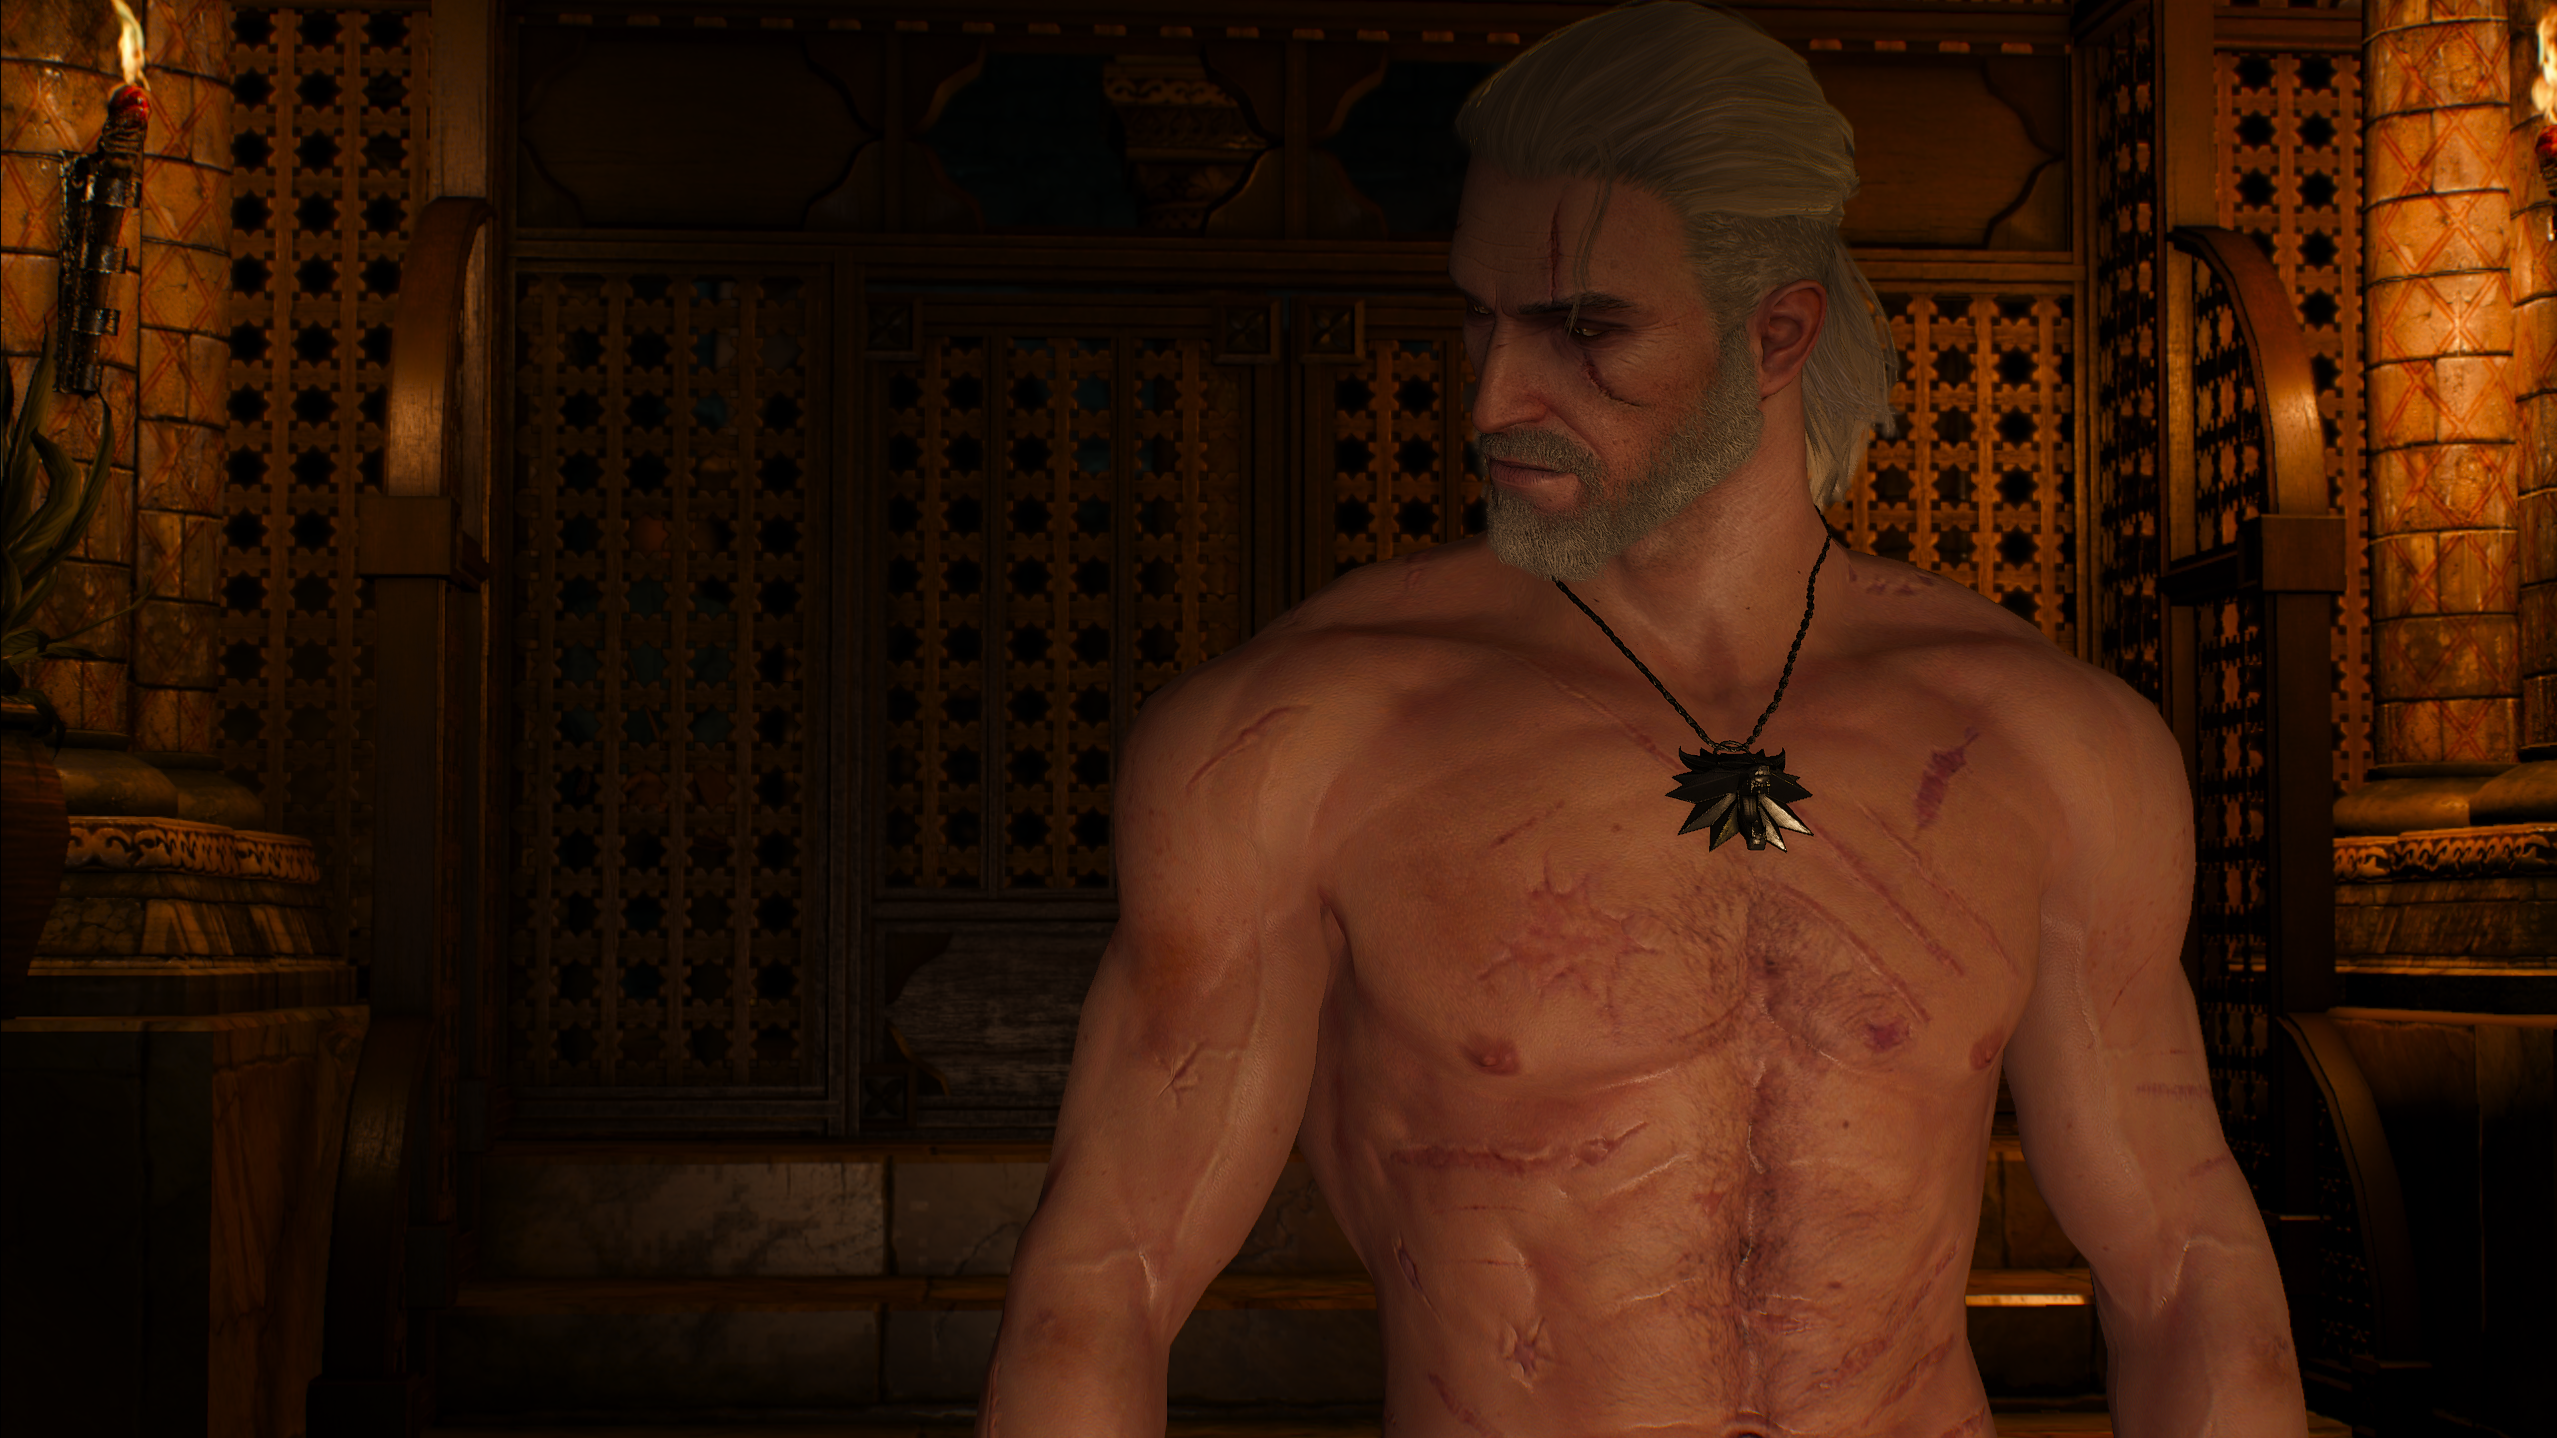 General 2557x1438 Geralt of Rivia The Witcher 3: Wild Hunt The Witcher bathhouse shirtless PC gaming digital art video games